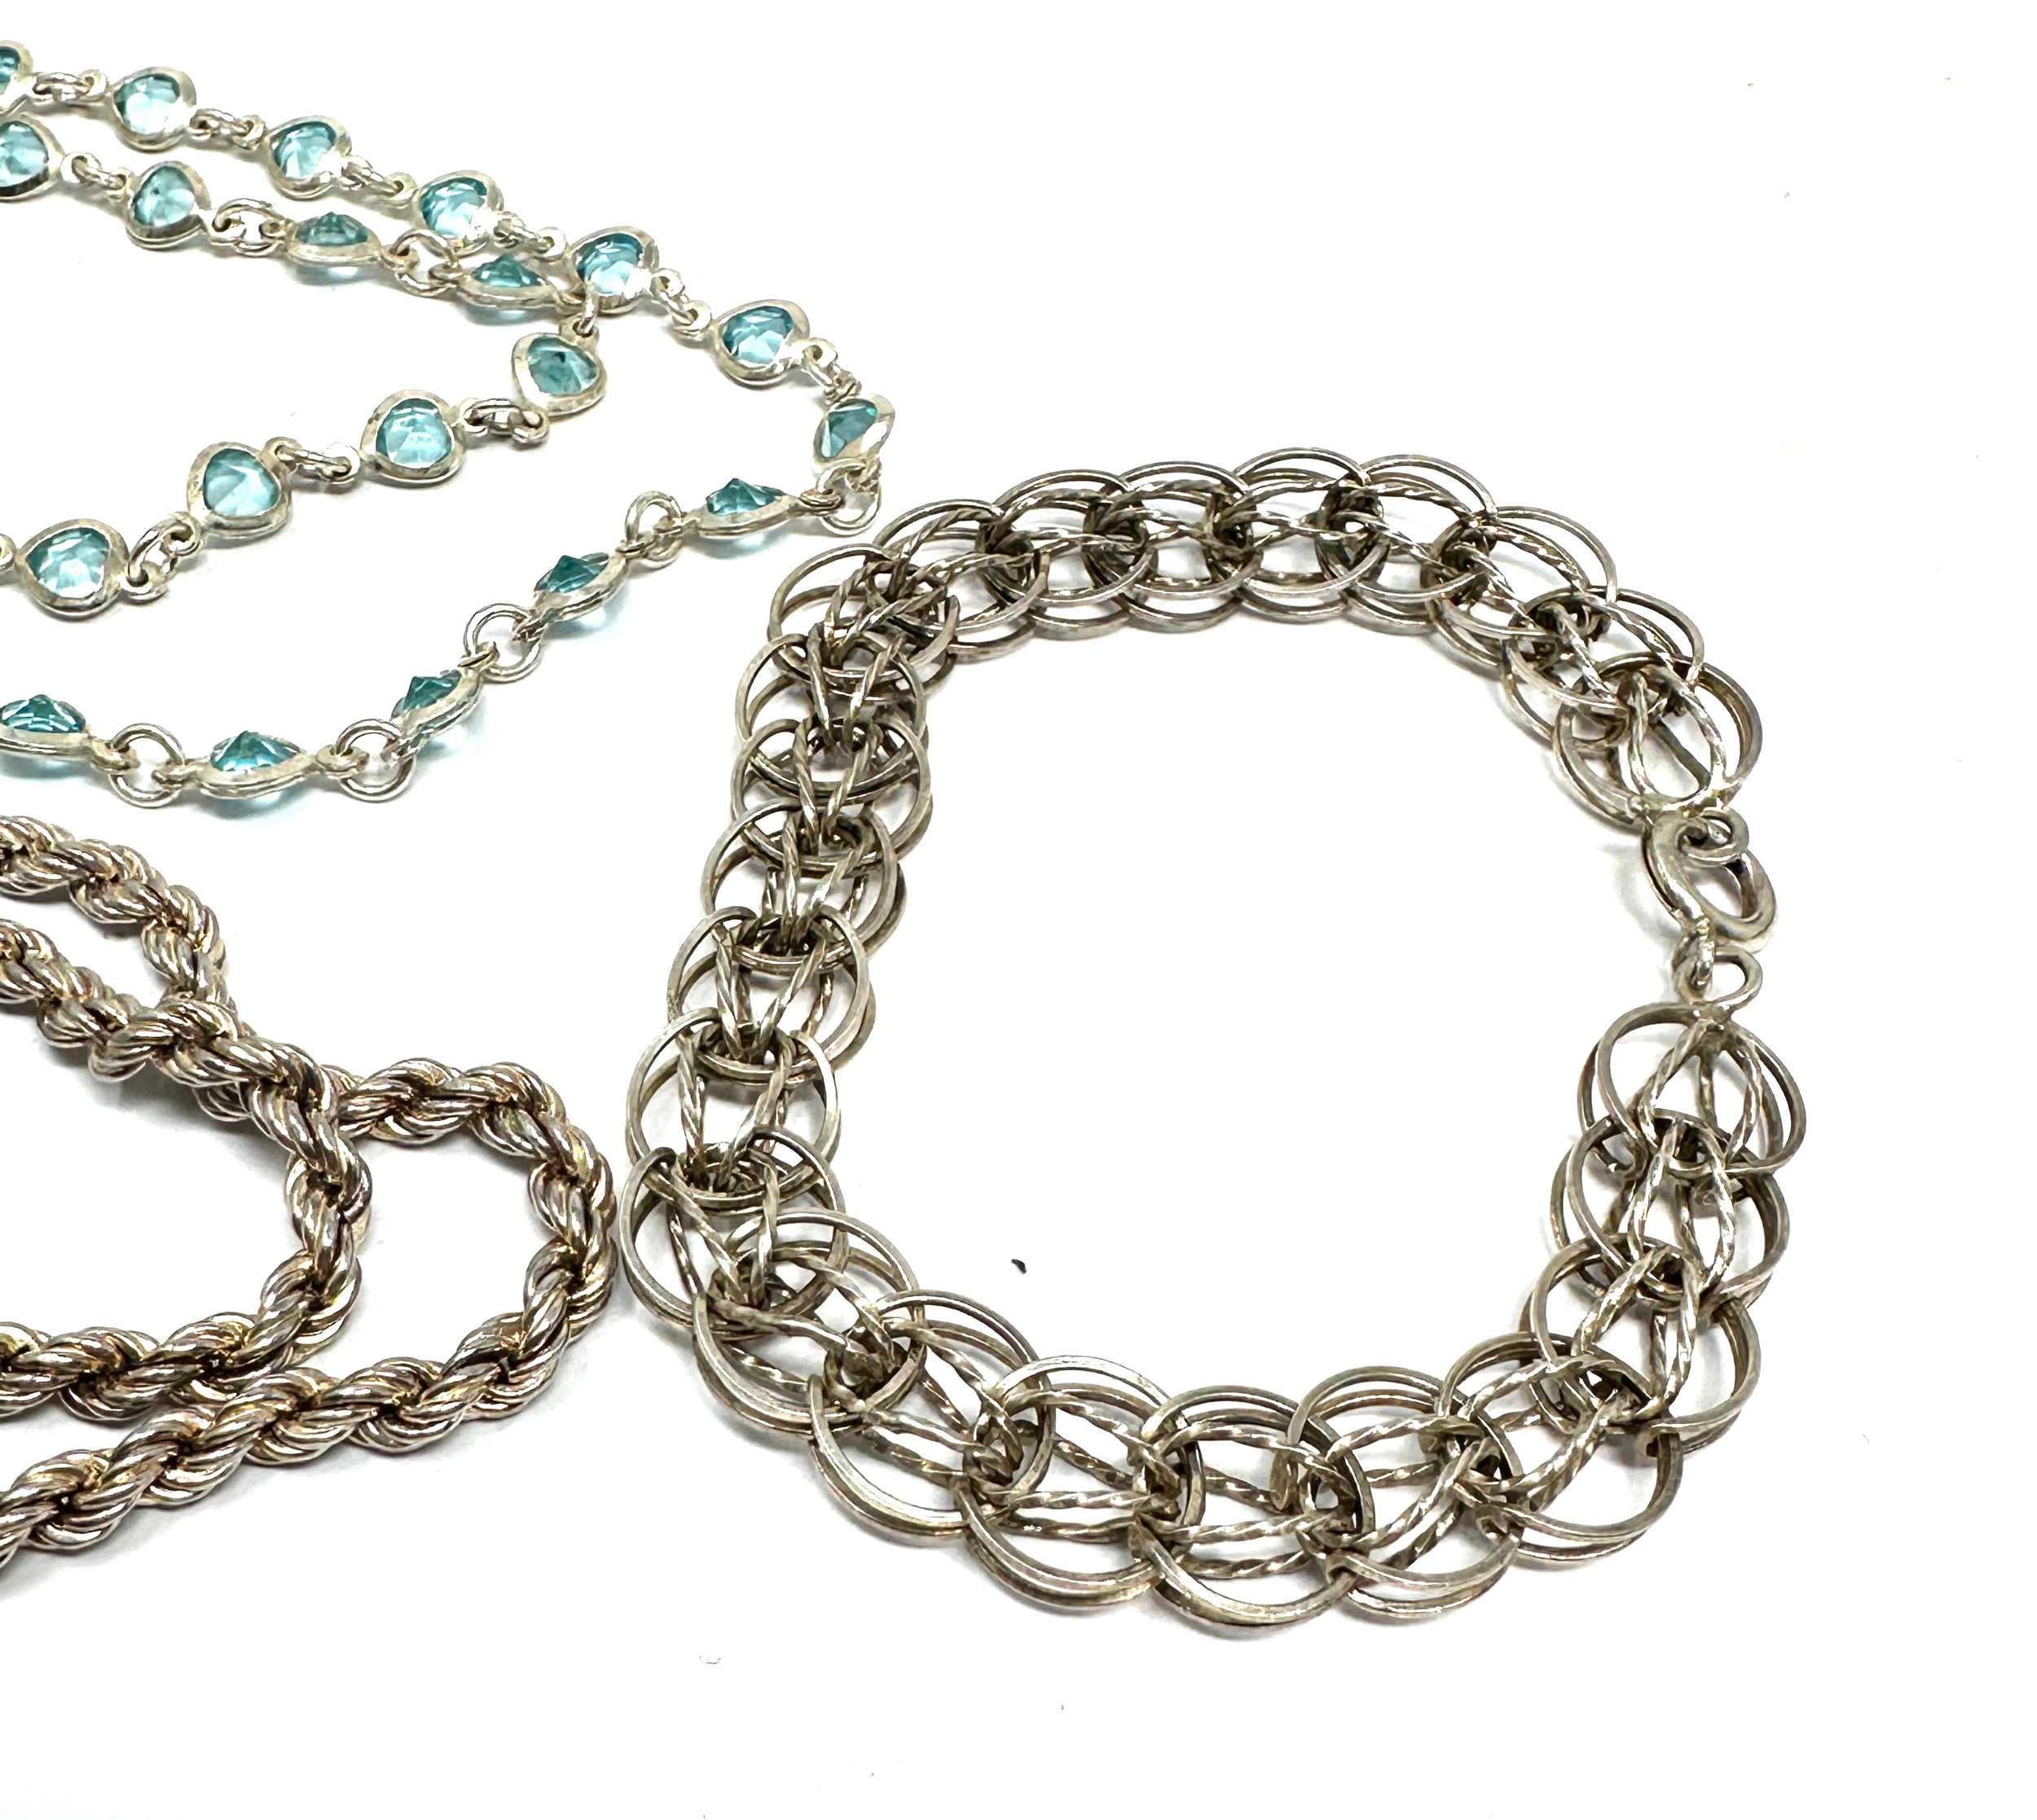 silver necrope twist chain stone set necklace & bracelet weight 30g - Image 3 of 3